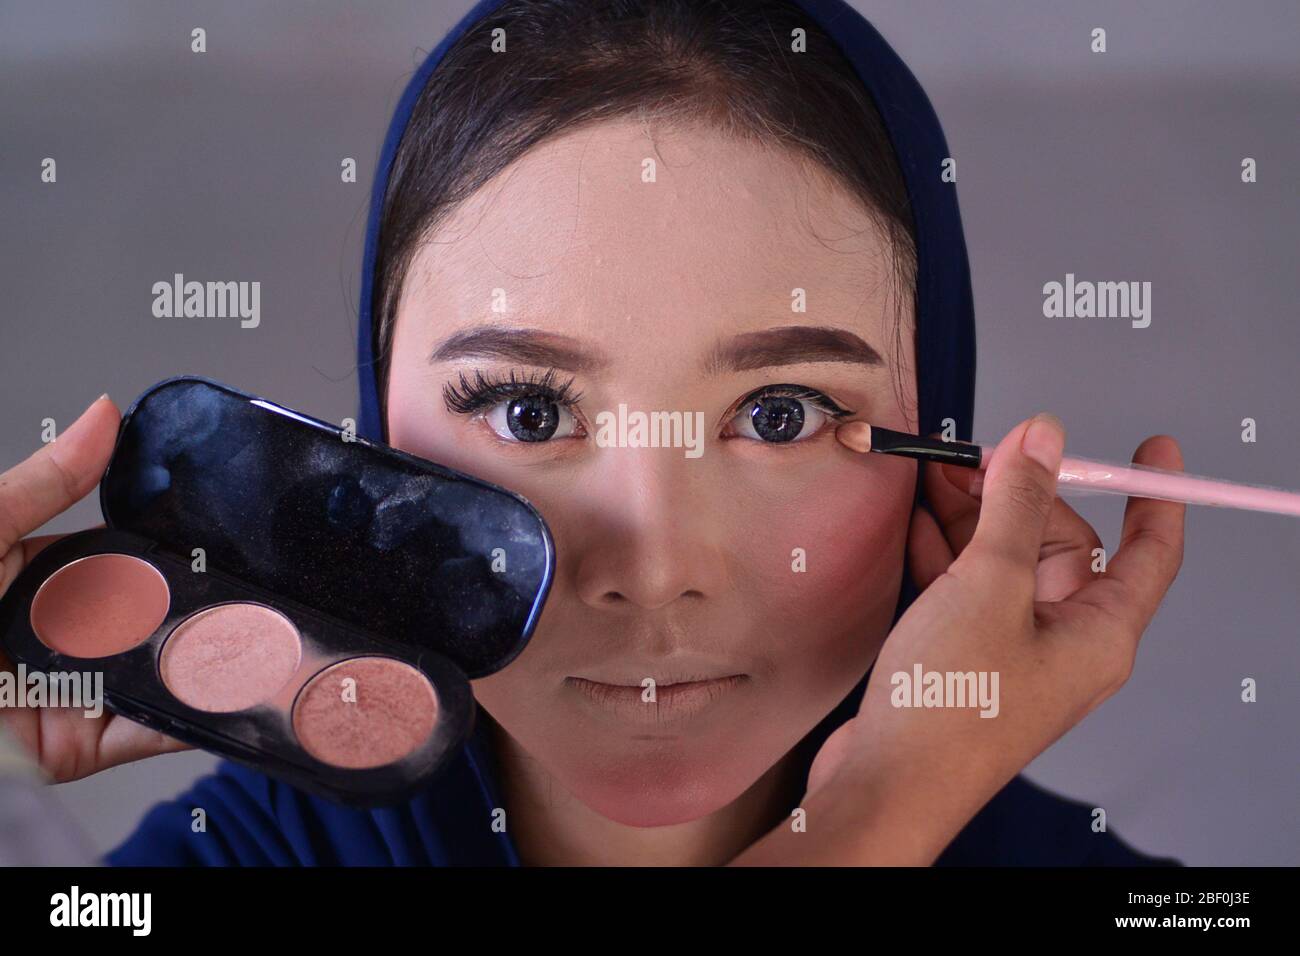 An aceh woman applies make up on her friend's face during the training.  Women in Aceh learn how to apply good makeup during a makeup training in  Blangpidie. Home cosmetology business in